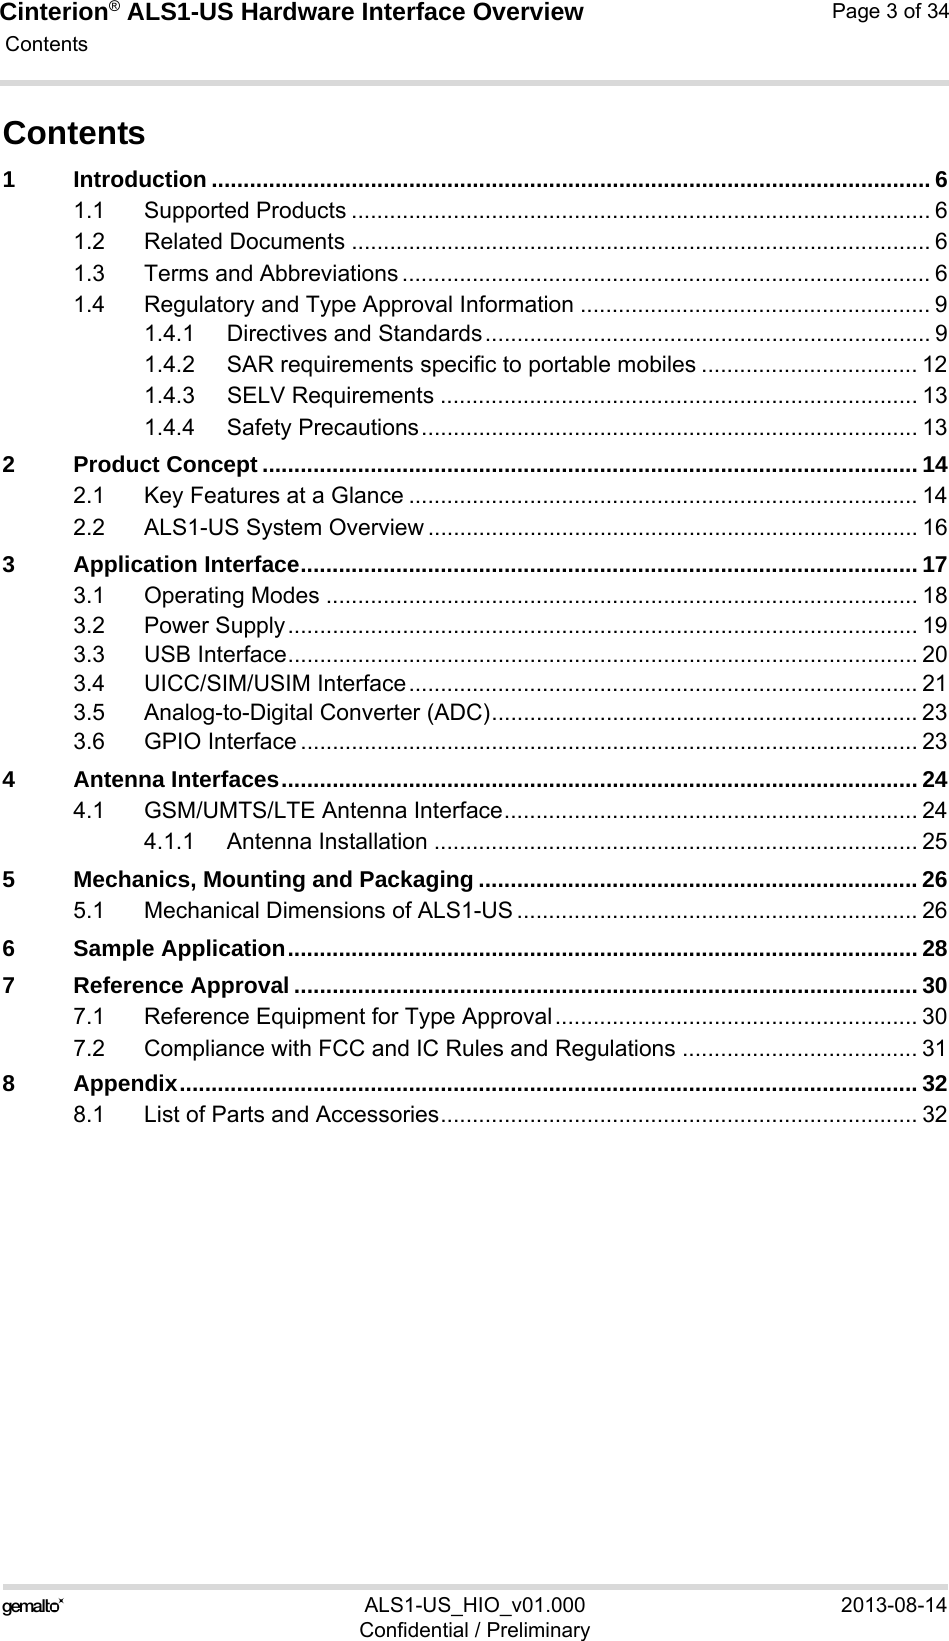 Cinterion® ALS1-US Hardware Interface Overview Contents34ALS1-US_HIO_v01.000 2013-08-14Confidential / PreliminaryPage 3 of 34Contents1 Introduction ................................................................................................................. 61.1 Supported Products ........................................................................................... 61.2 Related Documents ........................................................................................... 61.3 Terms and Abbreviations ................................................................................... 61.4 Regulatory and Type Approval Information ....................................................... 91.4.1 Directives and Standards...................................................................... 91.4.2 SAR requirements specific to portable mobiles .................................. 121.4.3 SELV Requirements ........................................................................... 131.4.4 Safety Precautions.............................................................................. 132 Product Concept ....................................................................................................... 142.1 Key Features at a Glance ................................................................................ 142.2 ALS1-US System Overview ............................................................................. 163 Application Interface................................................................................................. 173.1 Operating Modes ............................................................................................. 183.2 Power Supply................................................................................................... 193.3 USB Interface................................................................................................... 203.4 UICC/SIM/USIM Interface................................................................................ 213.5 Analog-to-Digital Converter (ADC)................................................................... 233.6 GPIO Interface ................................................................................................. 234 Antenna Interfaces.................................................................................................... 244.1 GSM/UMTS/LTE Antenna Interface................................................................. 244.1.1 Antenna Installation ............................................................................ 255 Mechanics, Mounting and Packaging ..................................................................... 265.1 Mechanical Dimensions of ALS1-US ............................................................... 266 Sample Application................................................................................................... 287 Reference Approval .................................................................................................. 307.1 Reference Equipment for Type Approval......................................................... 307.2 Compliance with FCC and IC Rules and Regulations ..................................... 318 Appendix.................................................................................................................... 328.1 List of Parts and Accessories........................................................................... 32